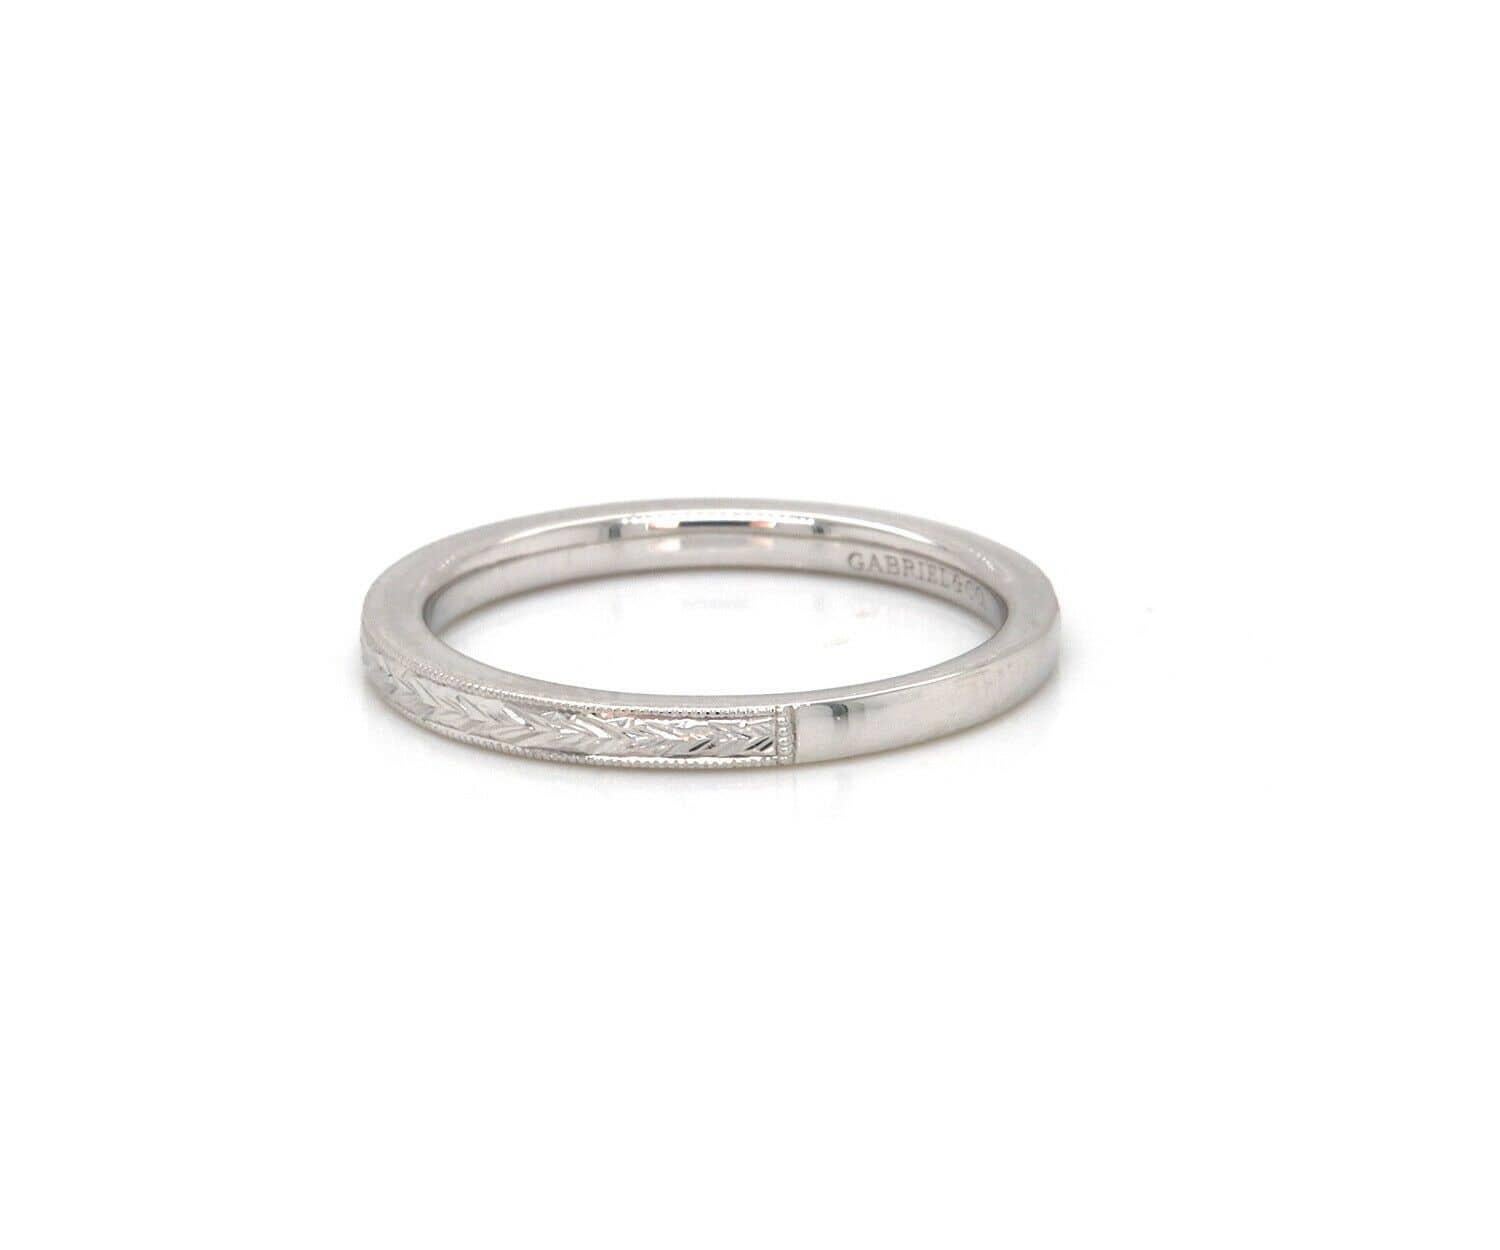 New Gabriel & Co. Filigree Engraved Band Ring in 14K

Gabriel & Co. Filigree Engraved Band Ring
14K White Gold
Band Width: Approx. 2.0 MM
Ring Size: 6.50 (US)
Weight: Approx. 2.40 Grams
Stamped: GABRIEL & CO., 14K, S1279713

Condition:
Offered for